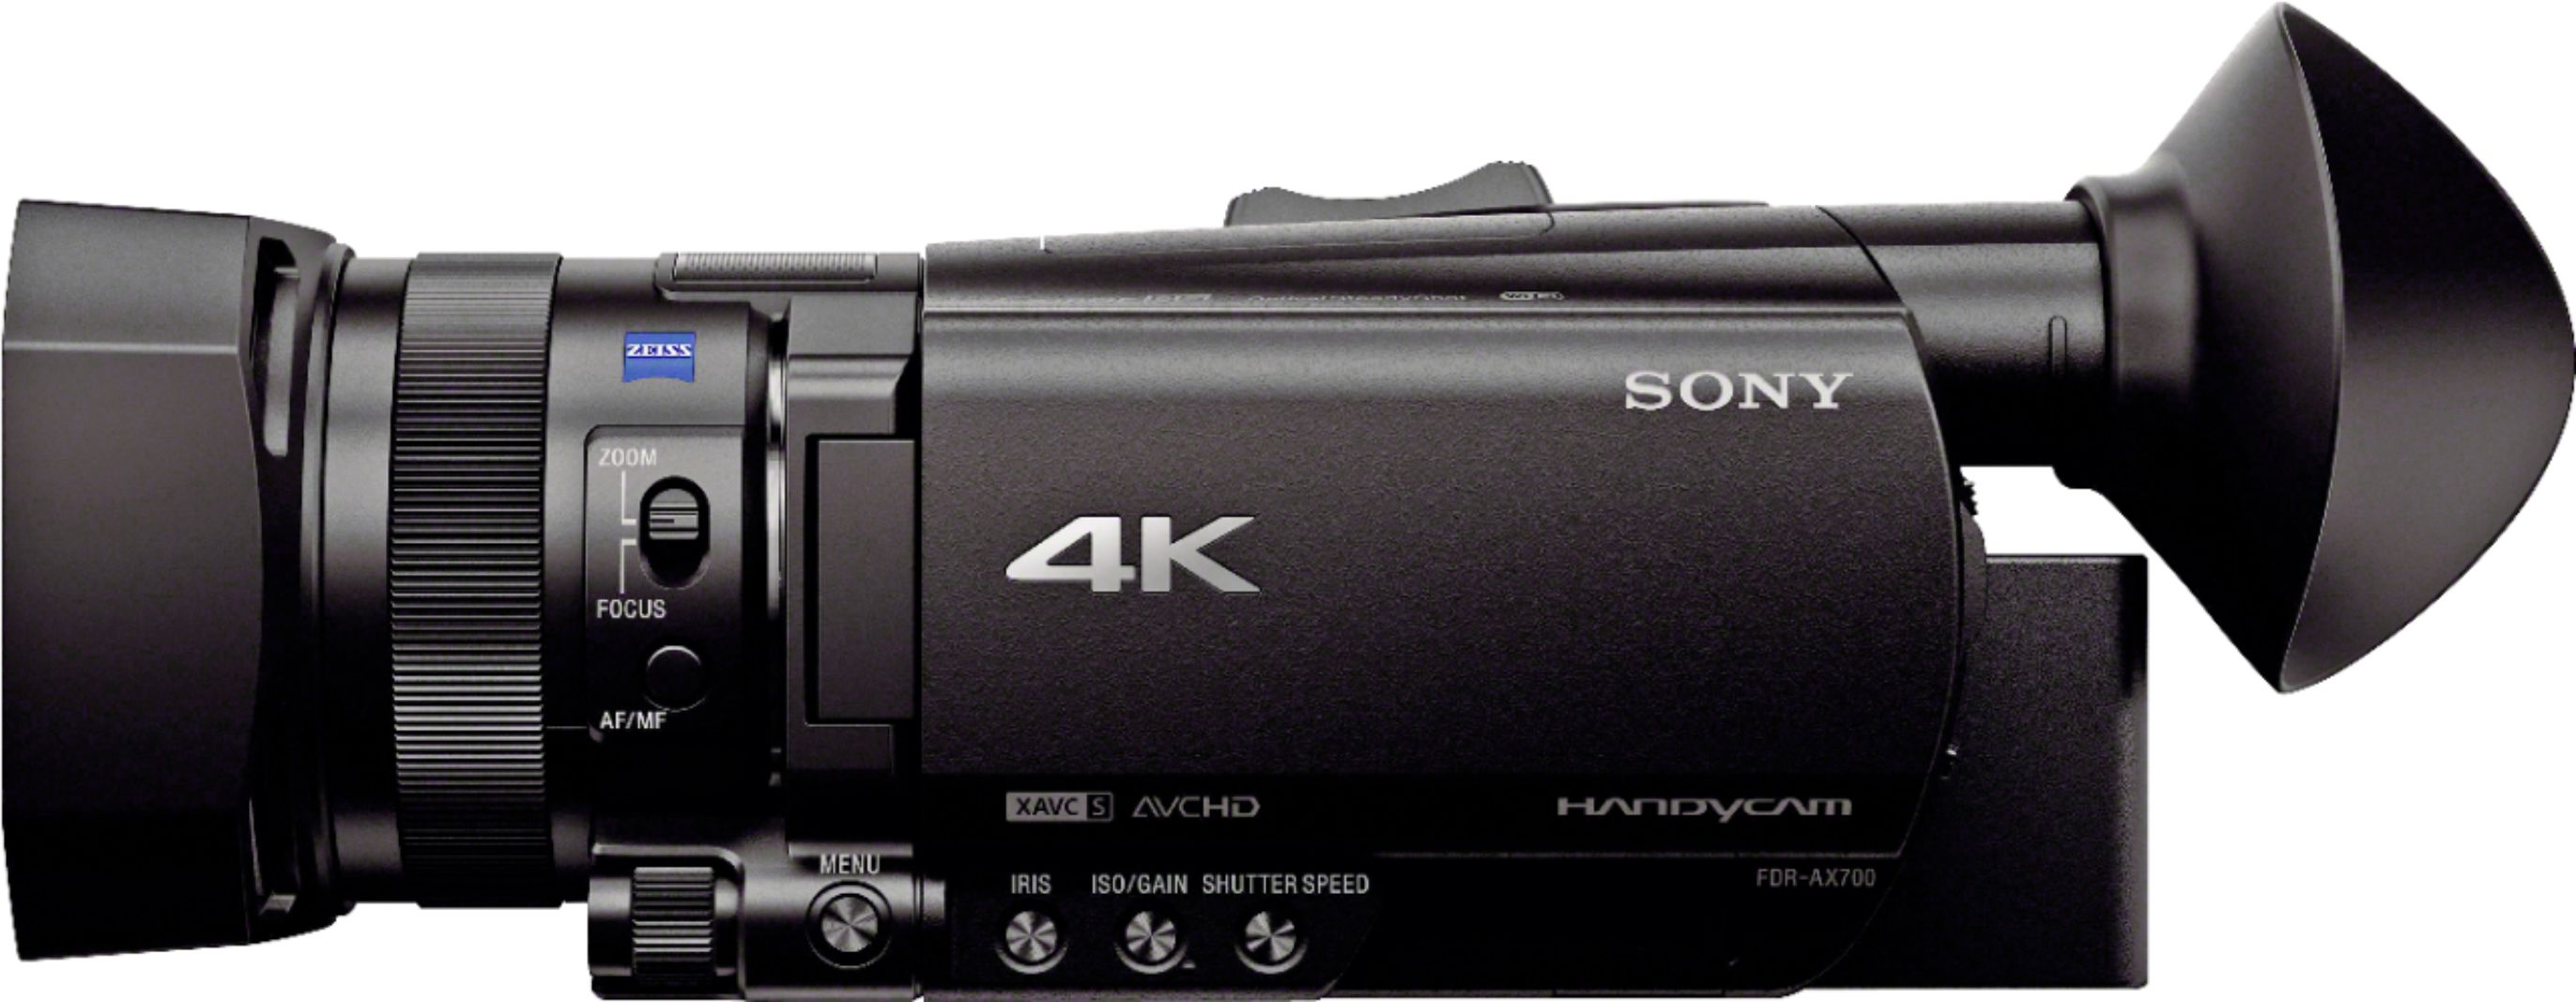 SONY FDR-AX700 4kHDR【美品】